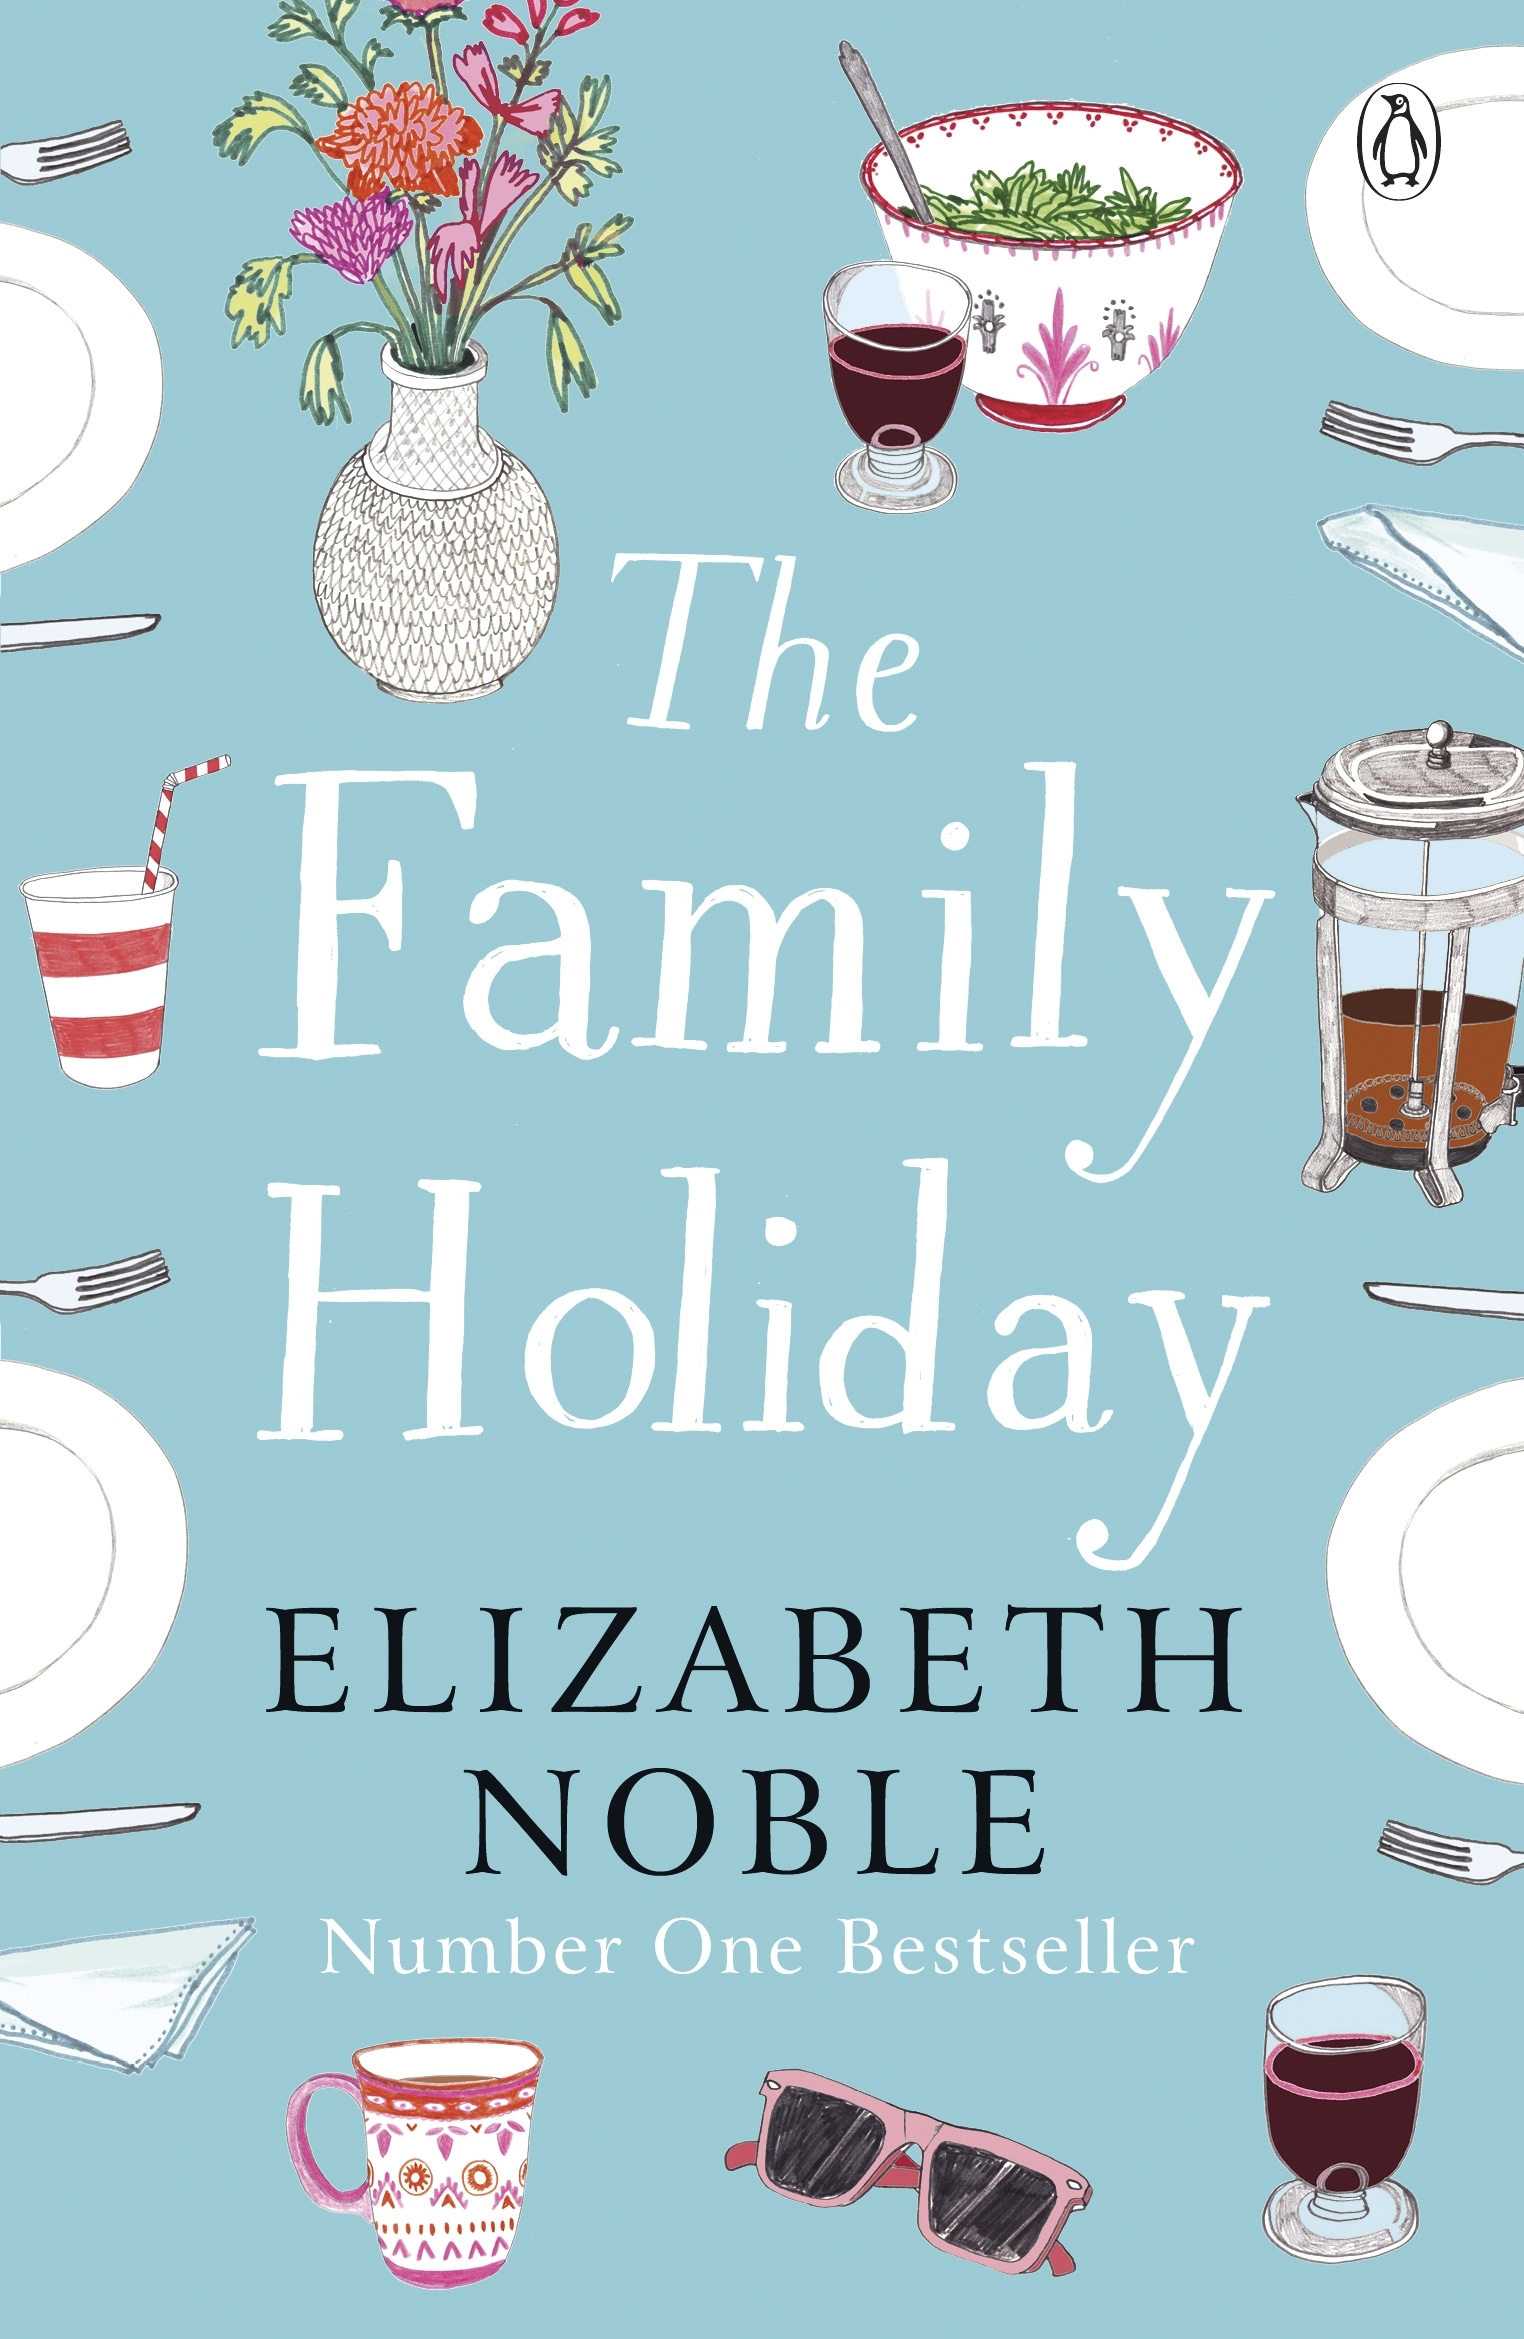 Book “The Family Holiday” by Elizabeth Noble — June 25, 2020